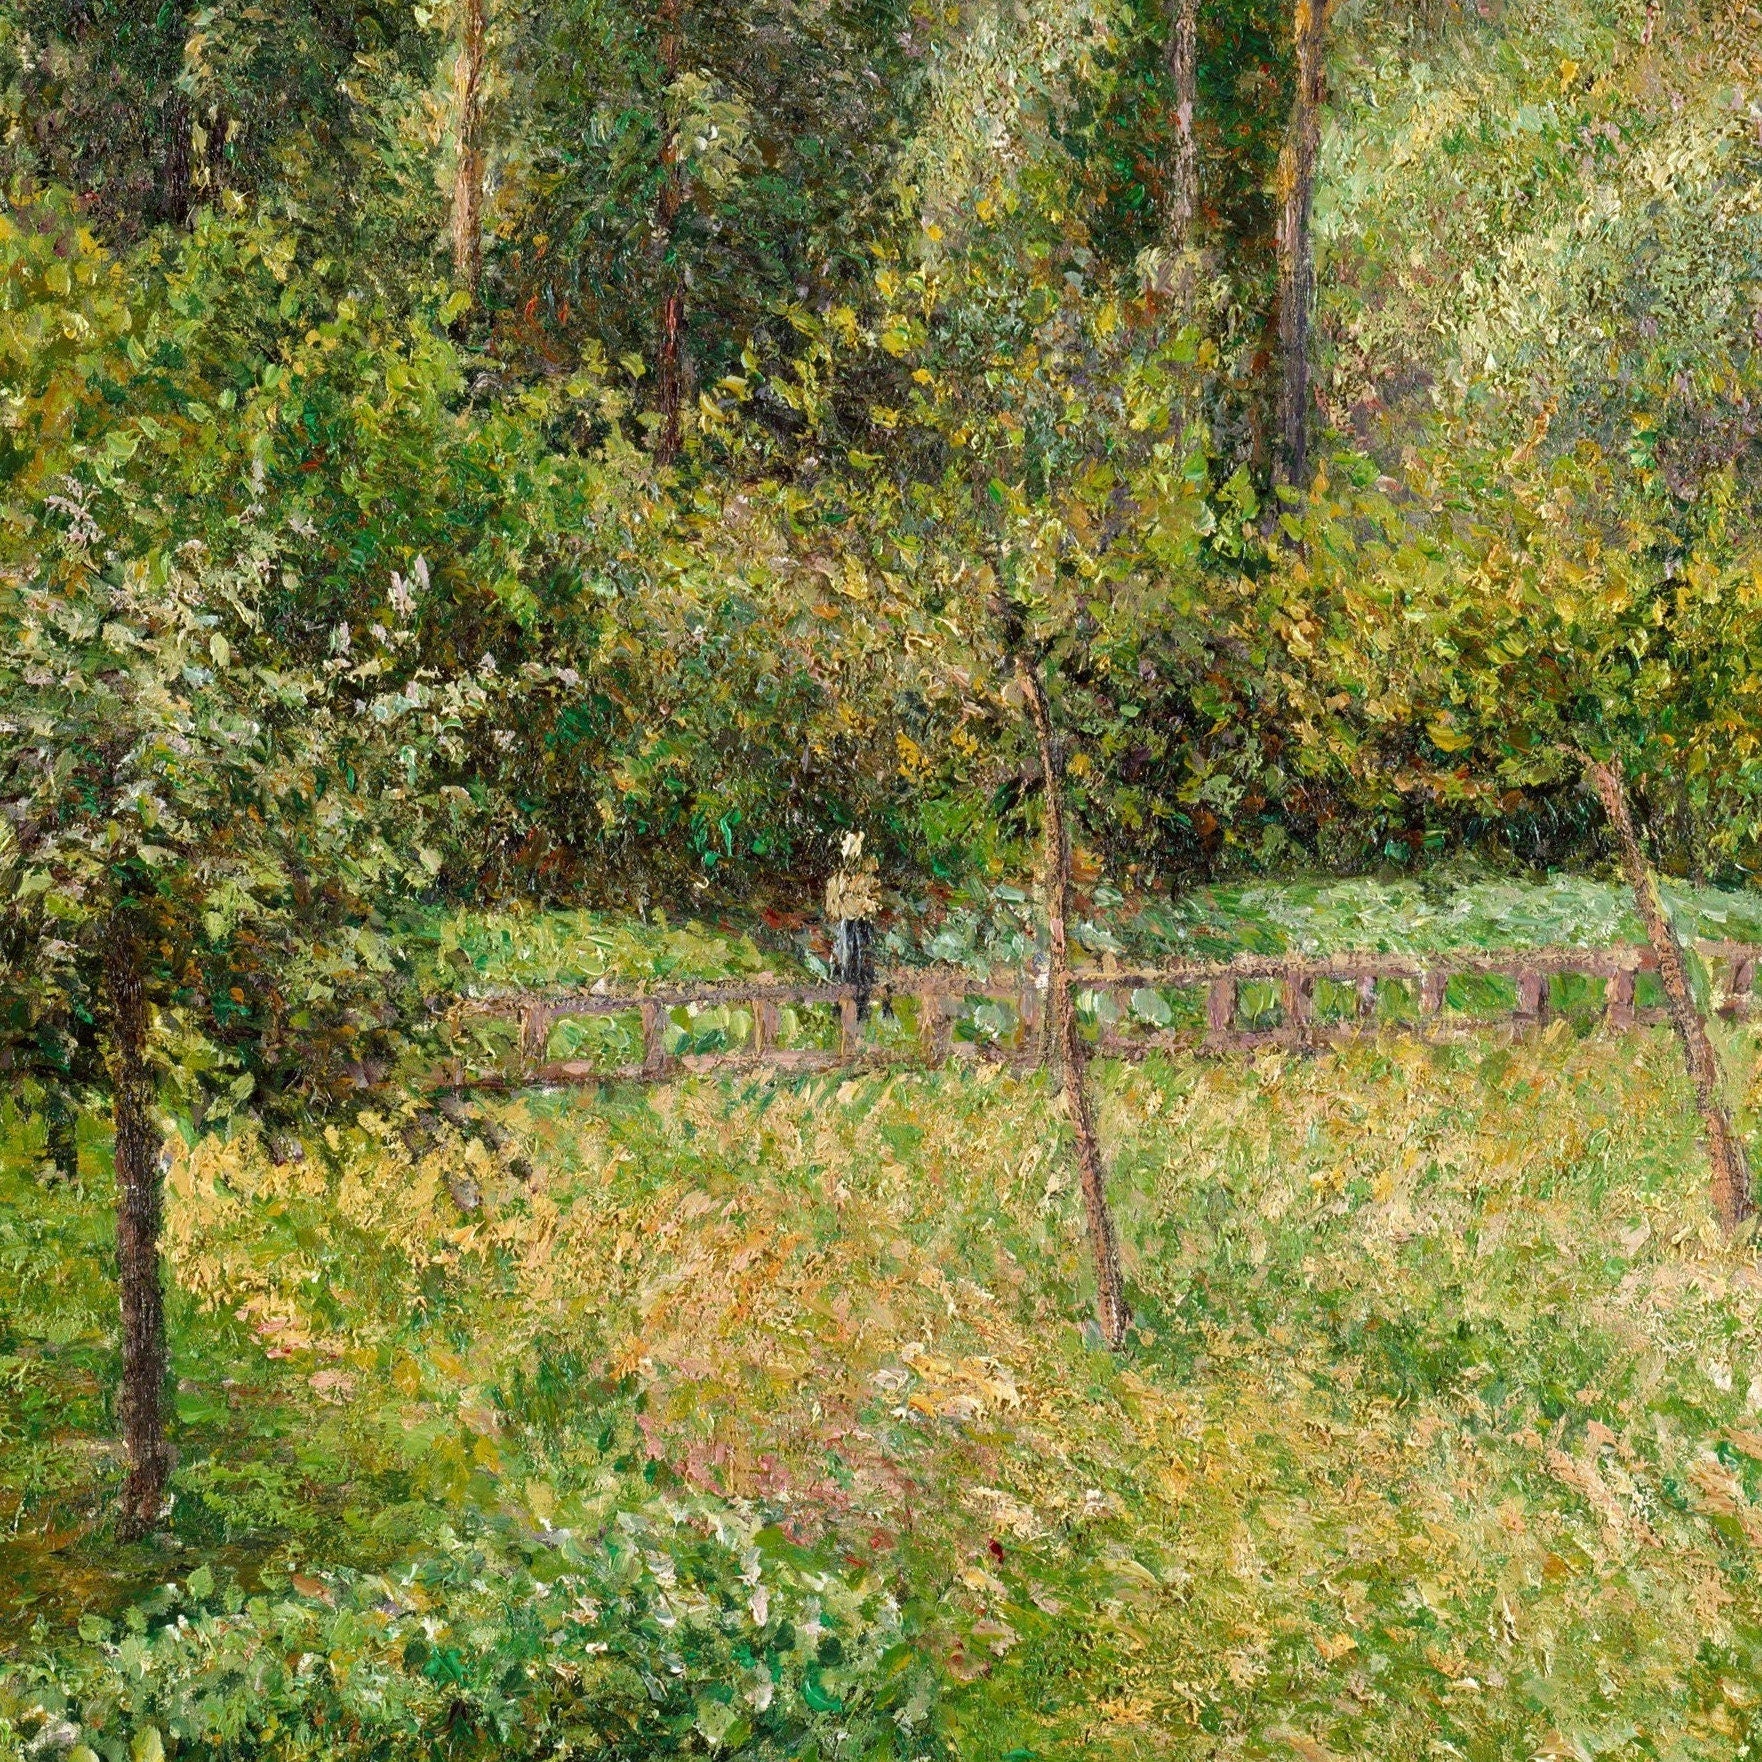 Poplars, Eragny by Camille Pissarro, 3d Printed with texture and brush strokes looks like original oil-painting, code:055